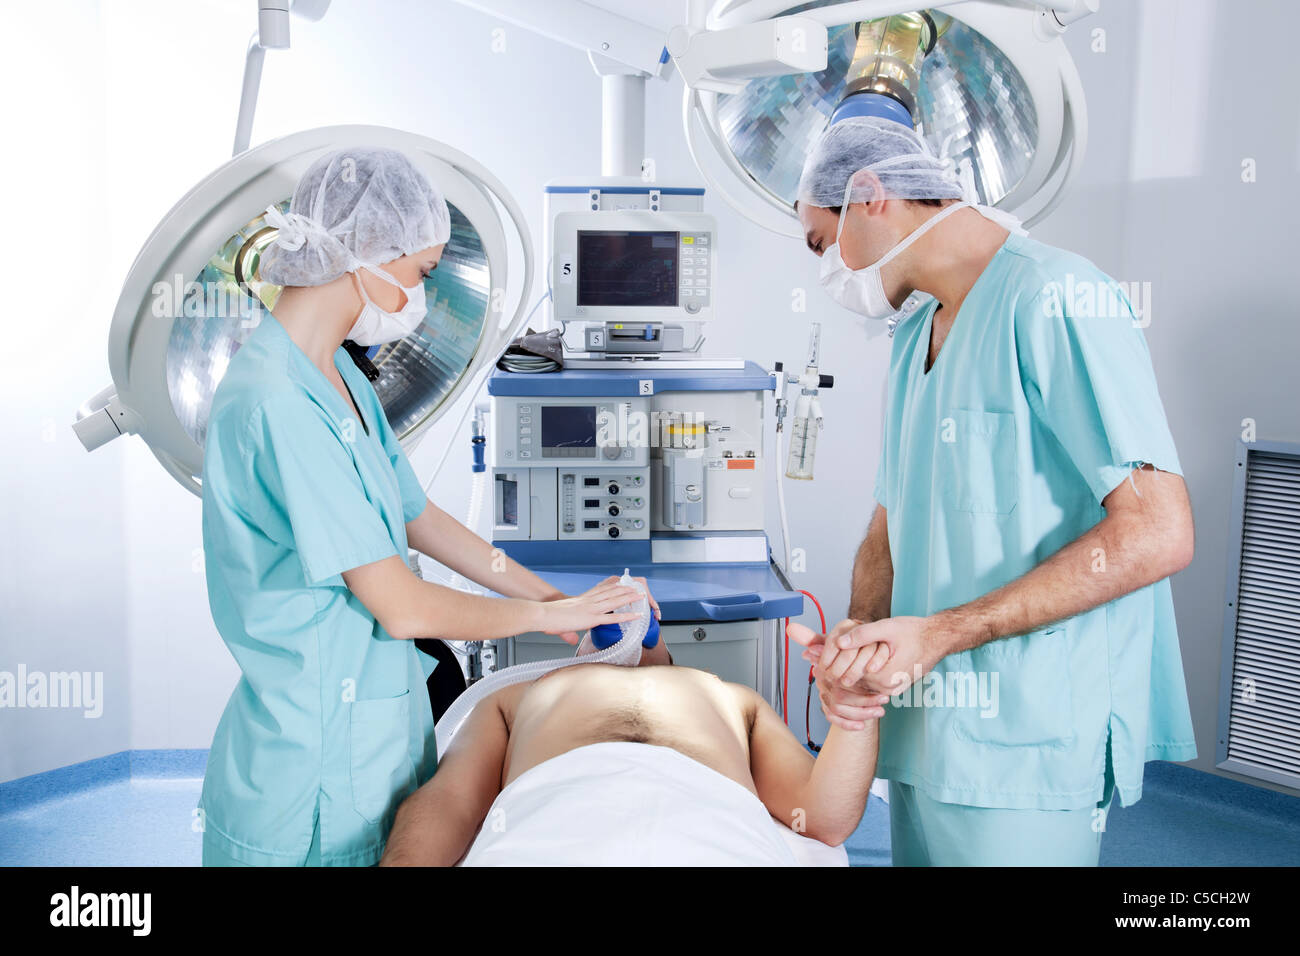 Surgeons operating on patient in an operating theatre Stock Photo